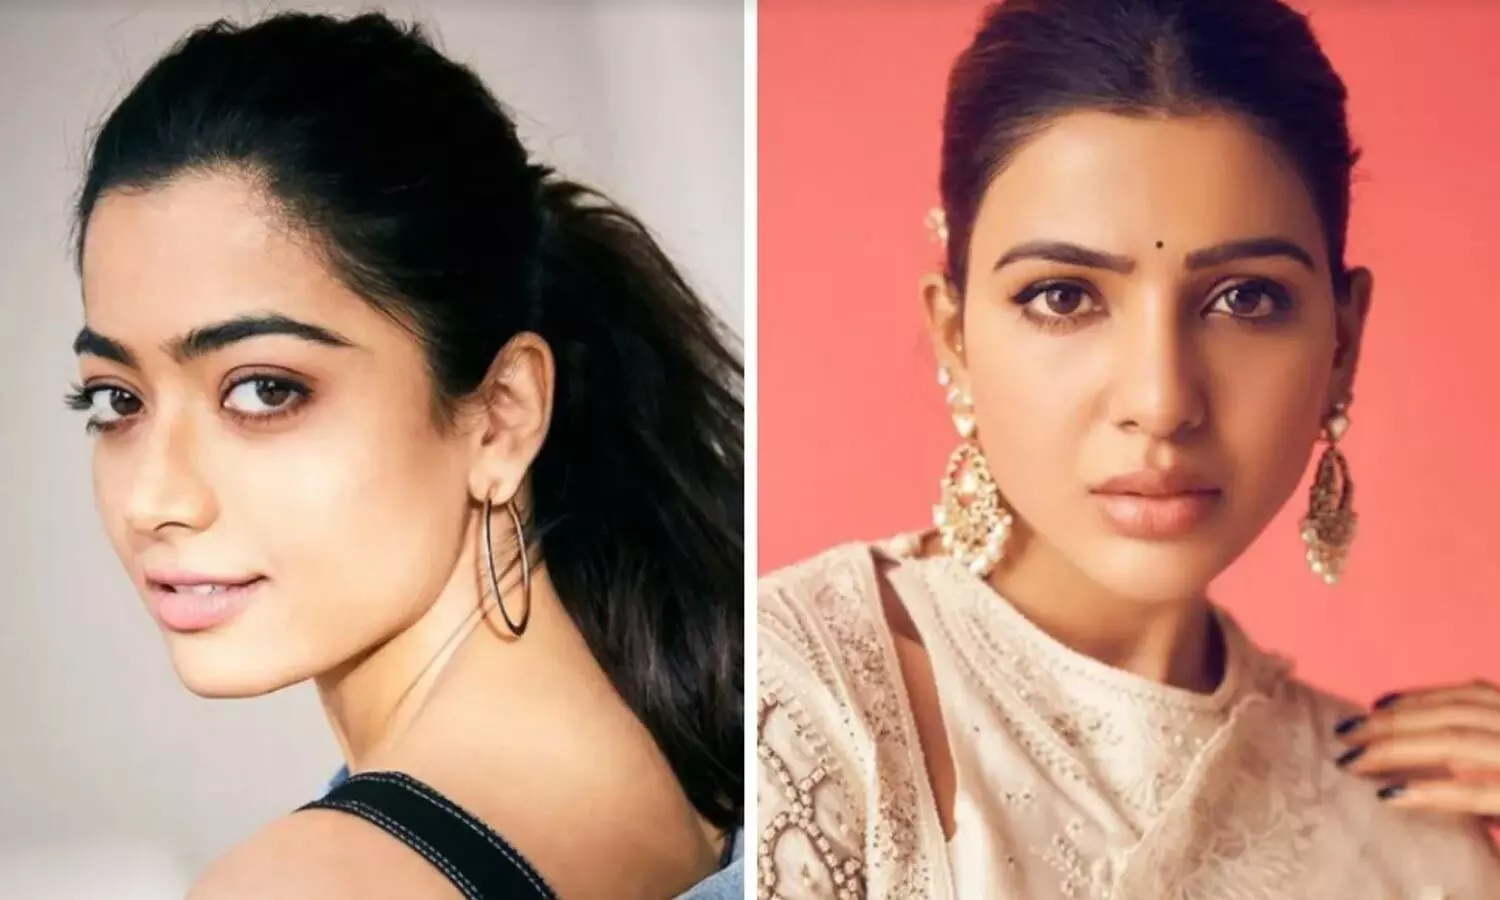 Not Samantha but Rashmika Mandanna will play the leading lady in THIS film!